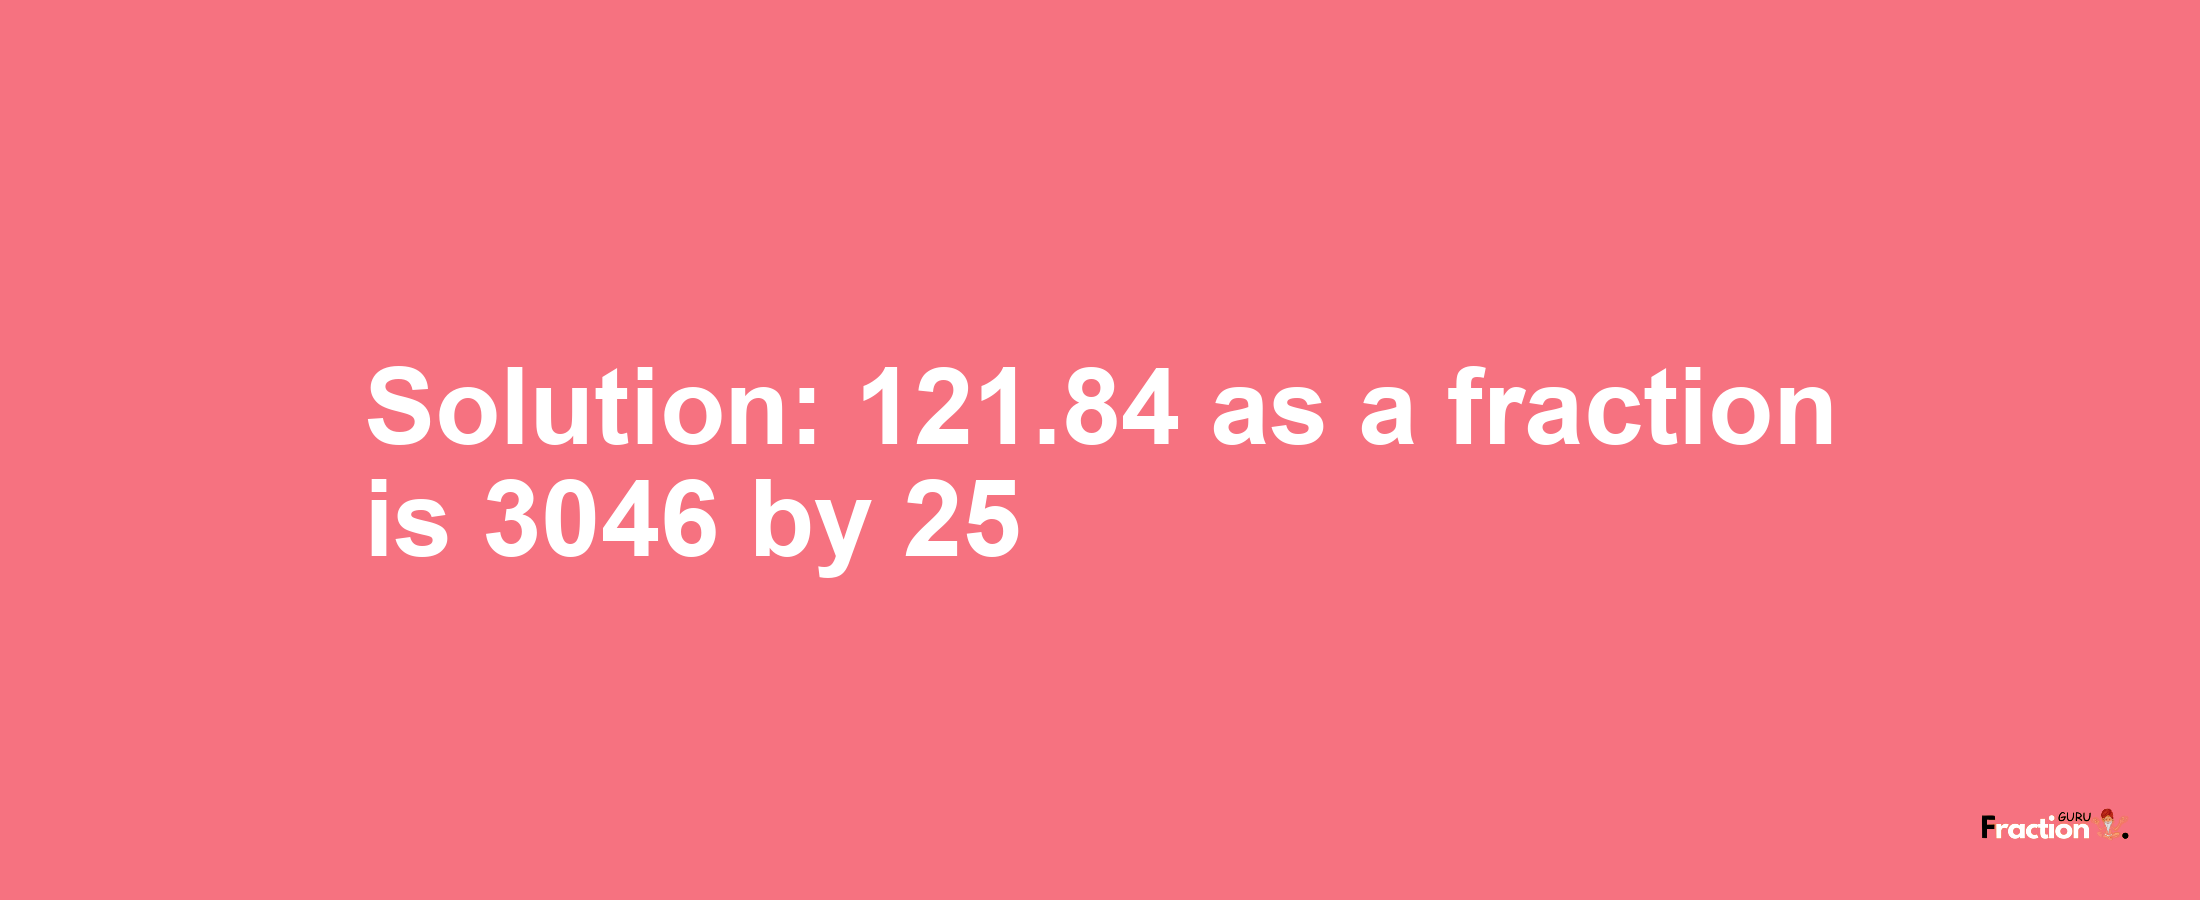 Solution:121.84 as a fraction is 3046/25